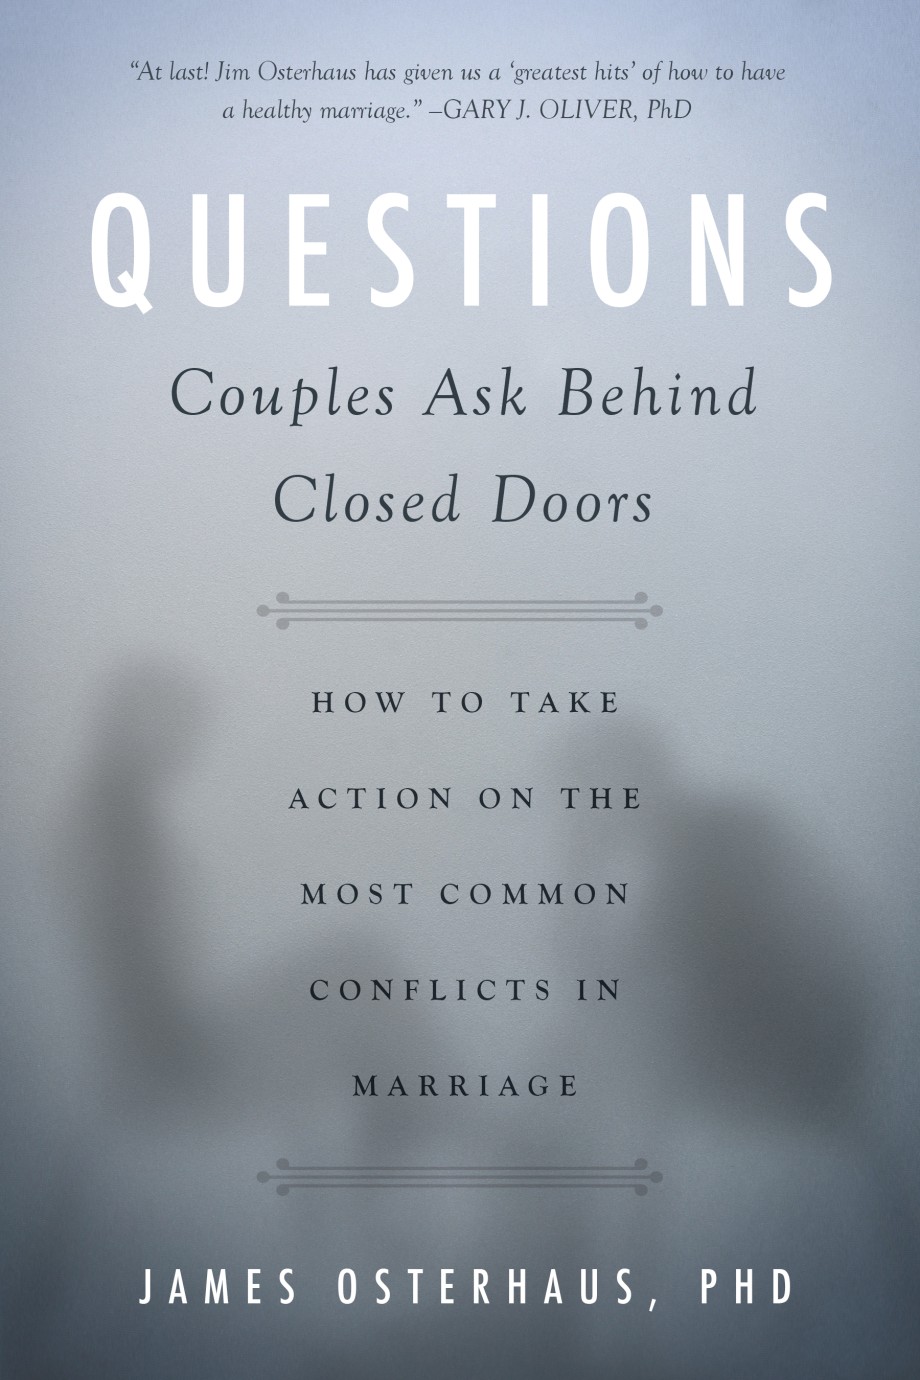 Questions Couples Ask Behind Closed Doors How to Take Action on the Most Common Conflicts in Marriage